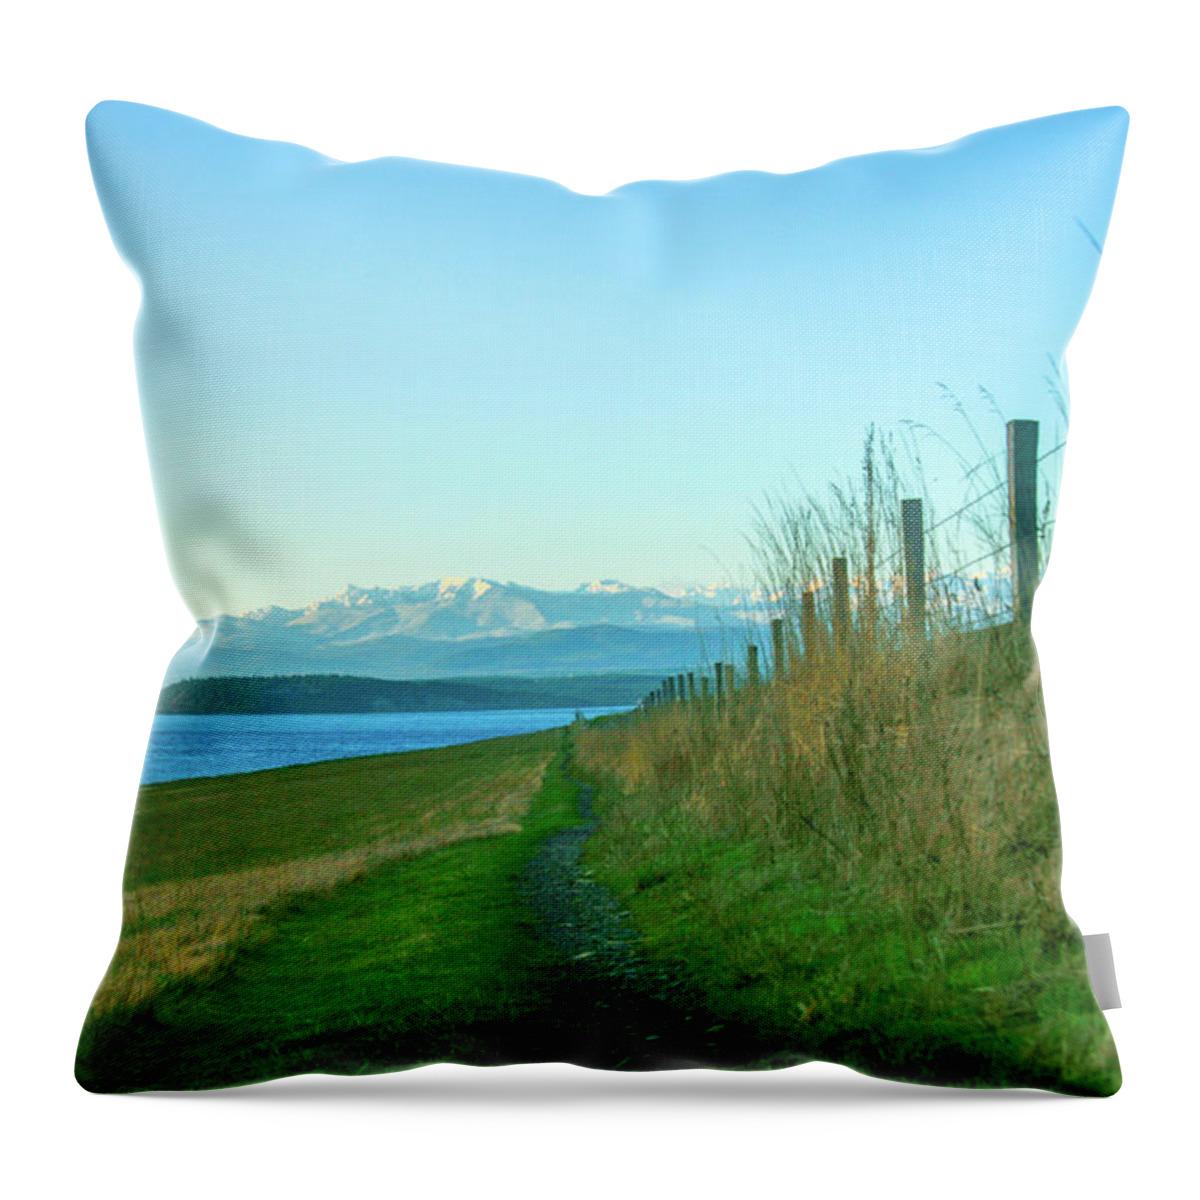 Bluff Throw Pillow featuring the photograph Go Take a Hike by Leslie Struxness